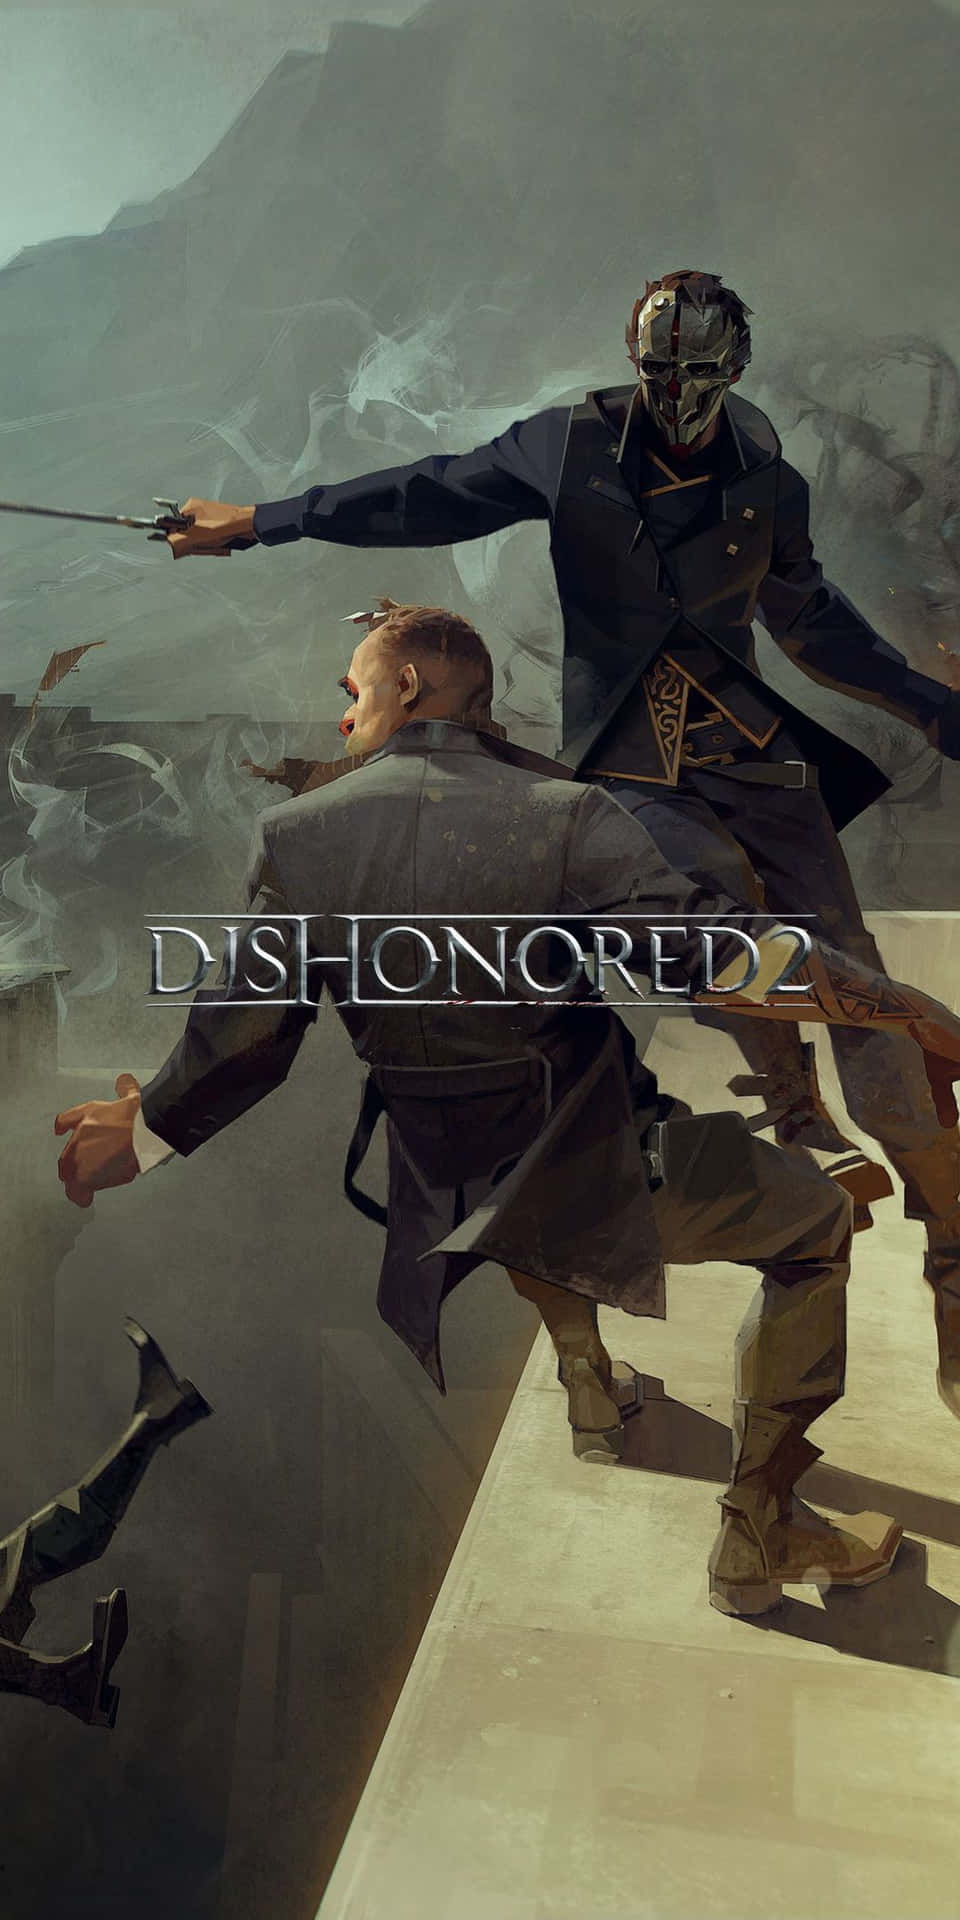 Bring the world of Dishonored 2 to life with Google Pixel 3